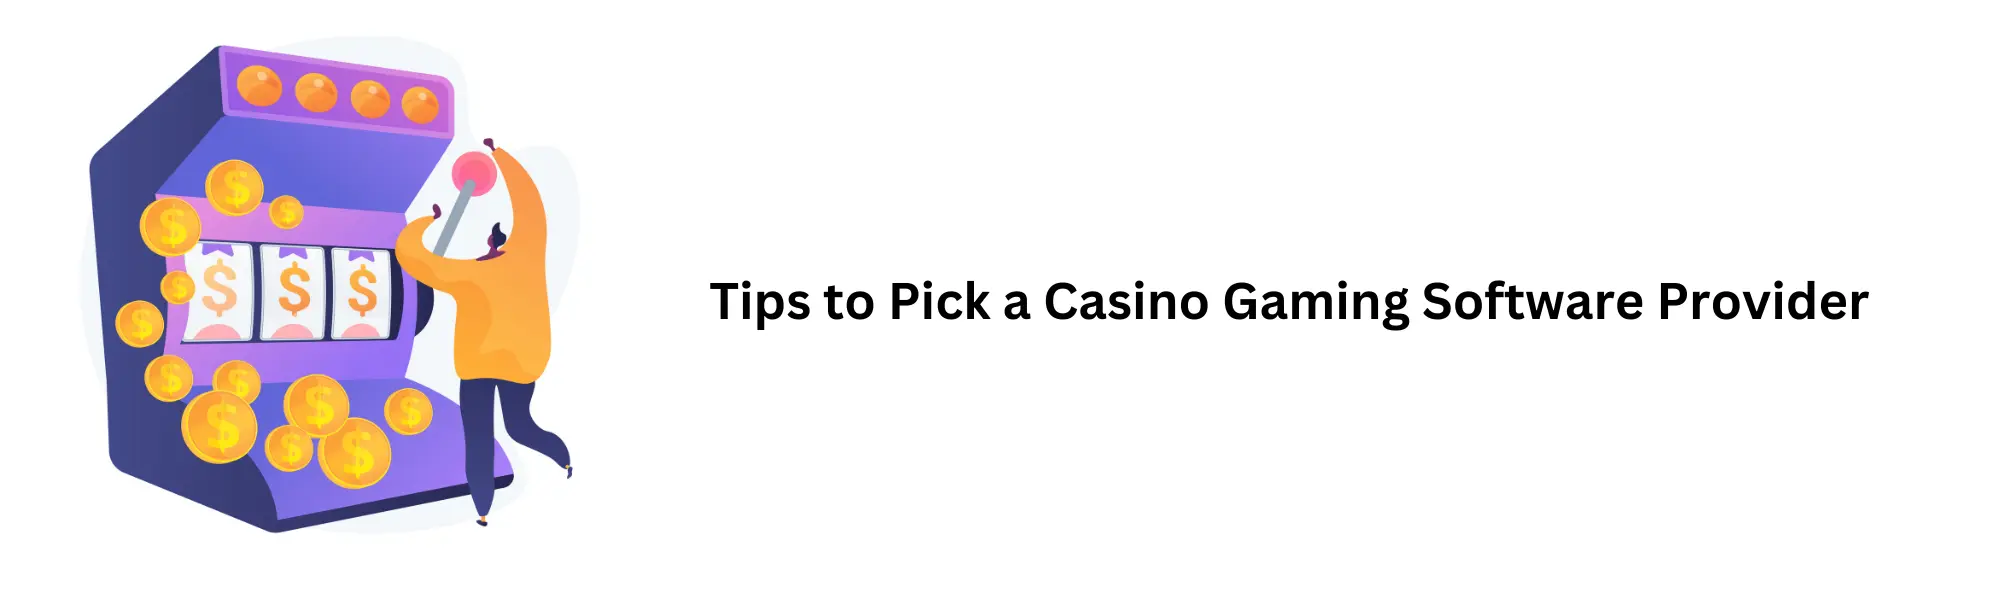 Tips-to-Pick-a-Right-Casino-Gaming-Software-Provider